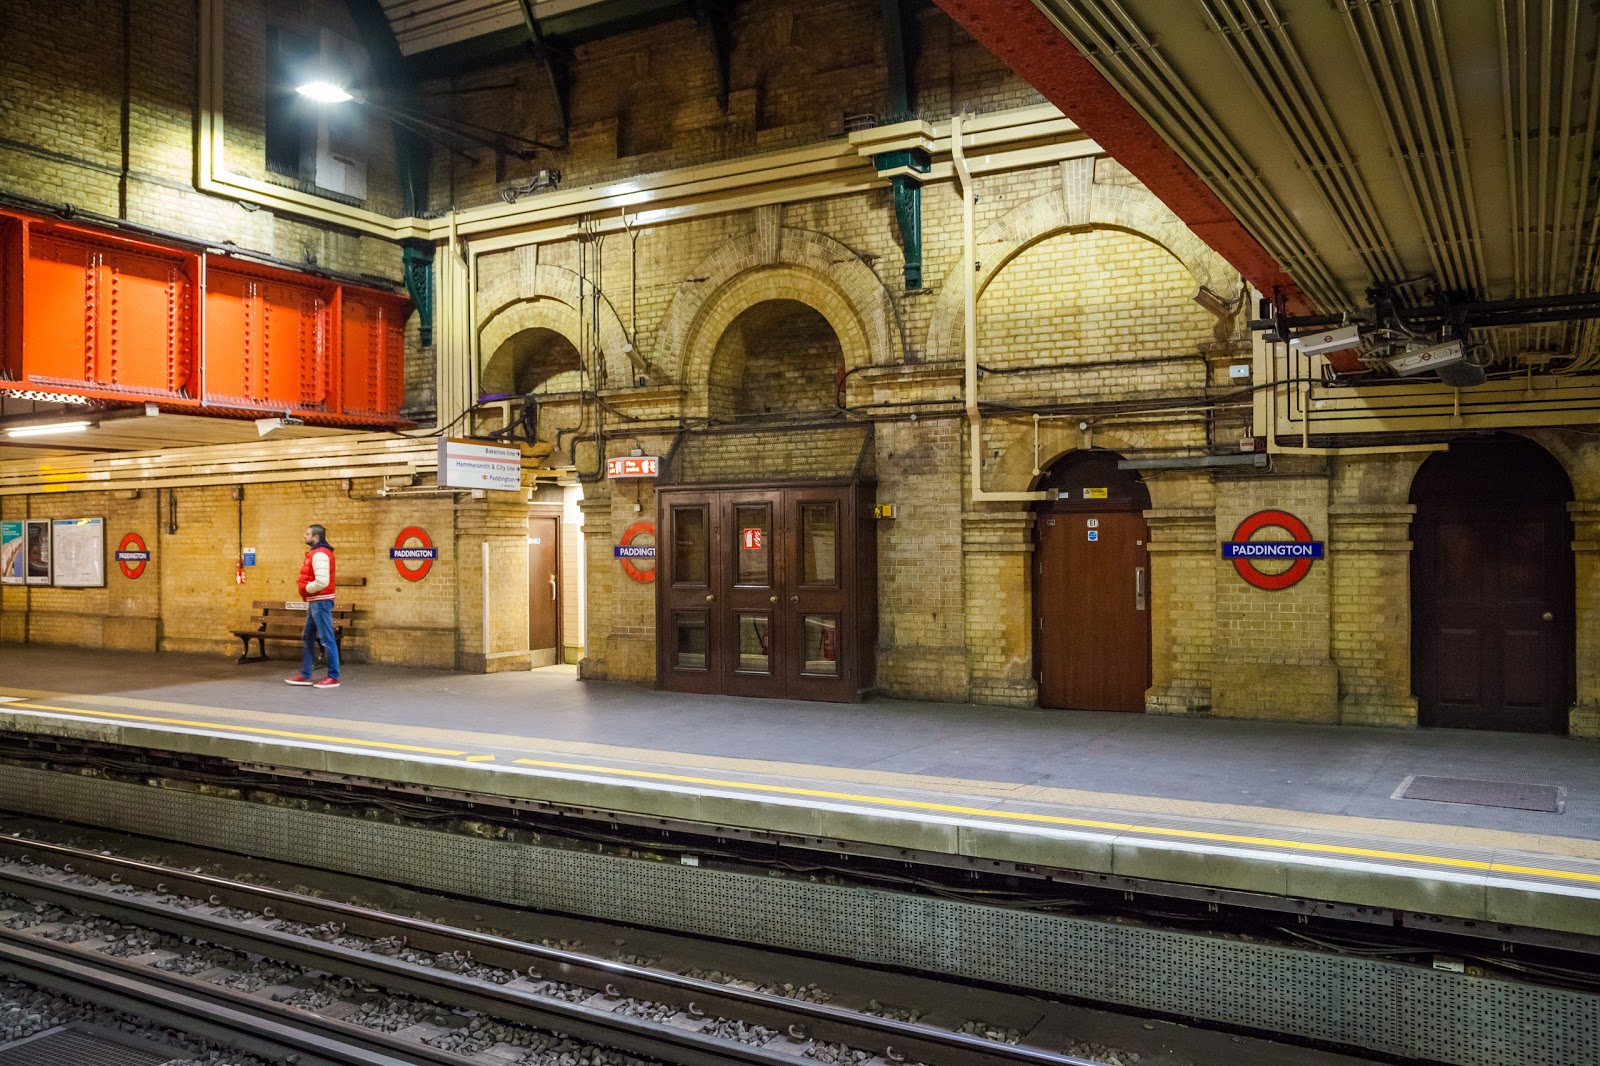 tour old london underground stations